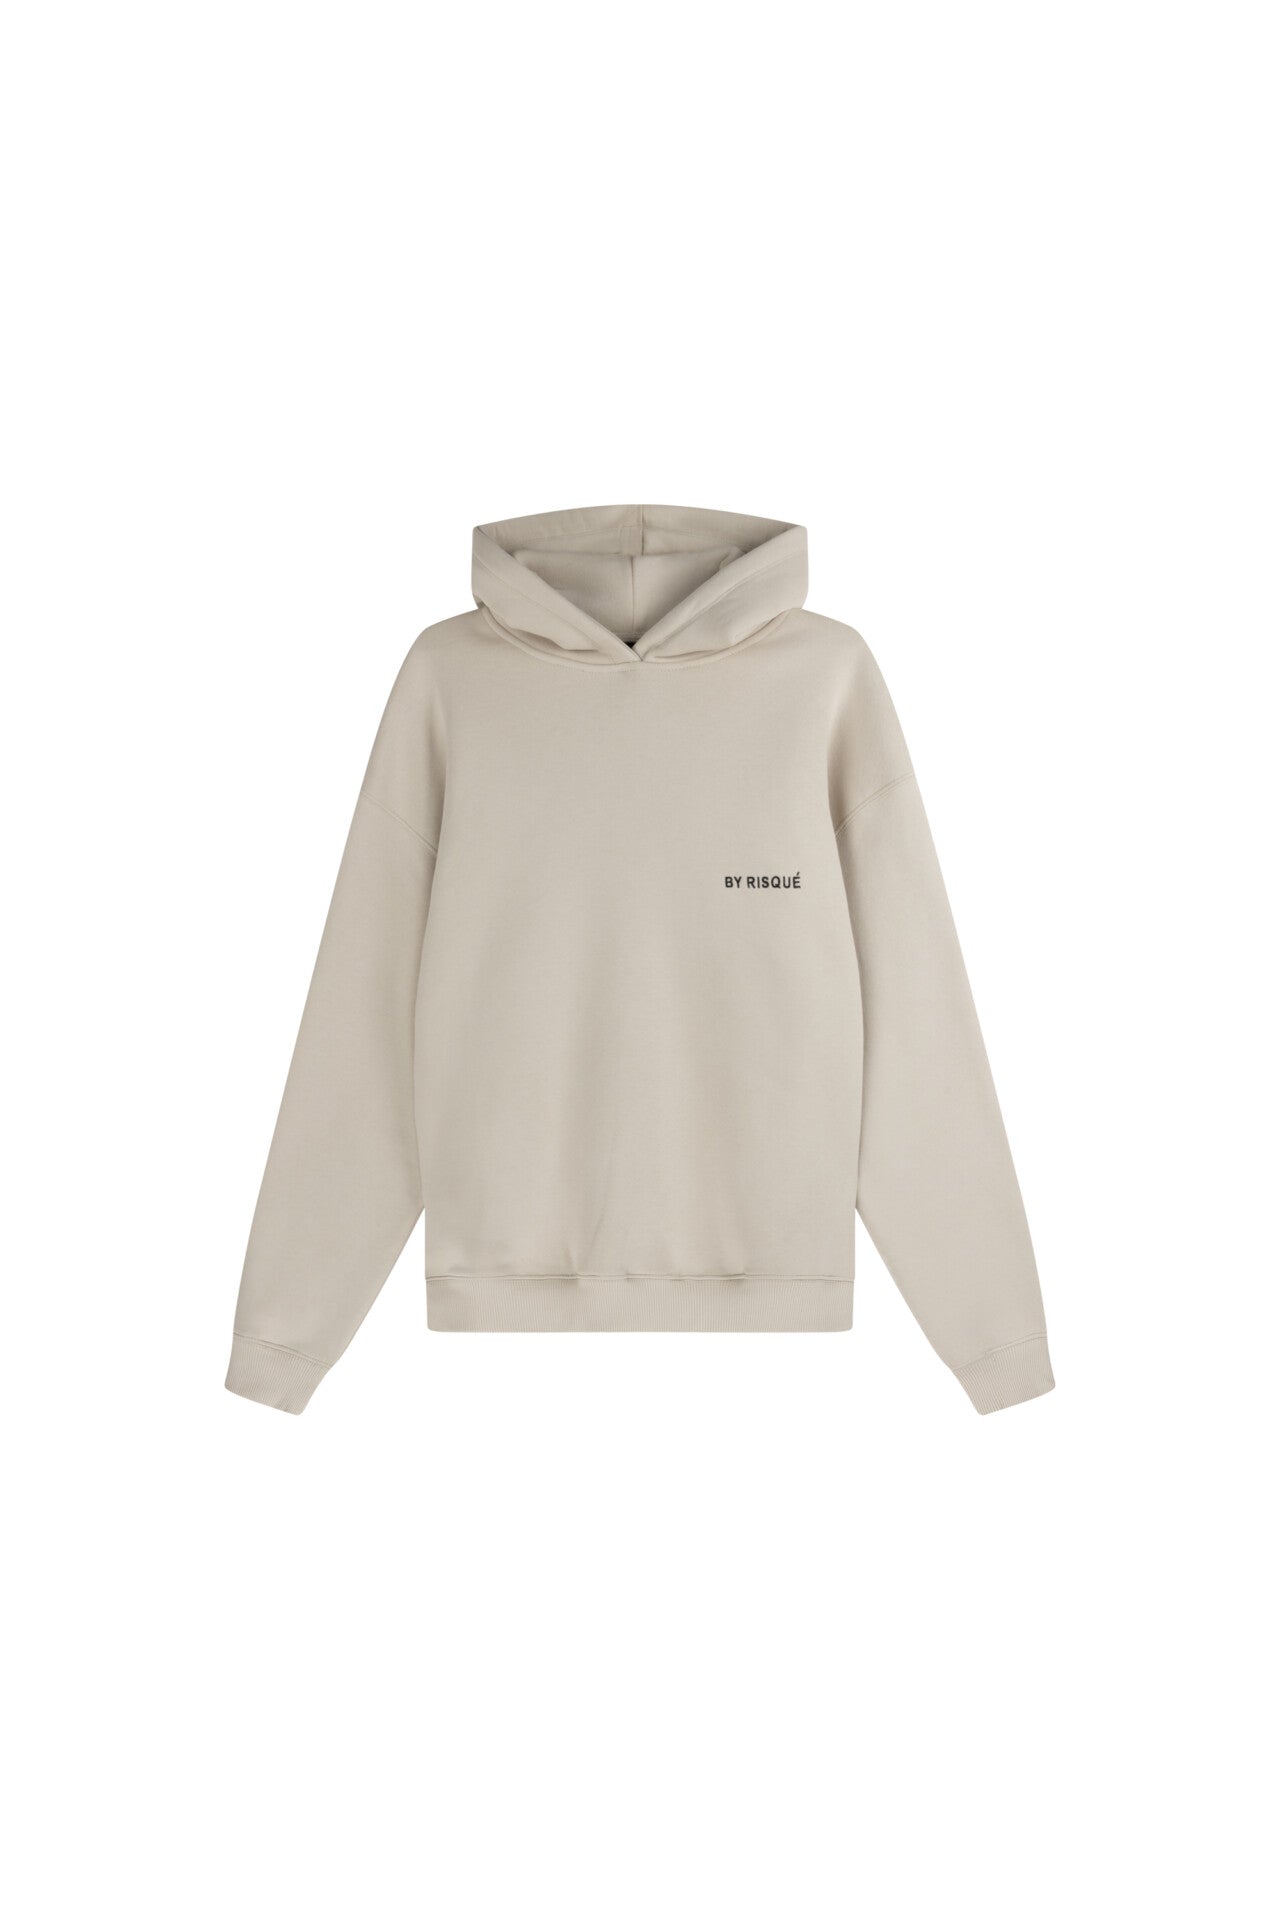 BY RISQUÉ Summer Sand Hoodie